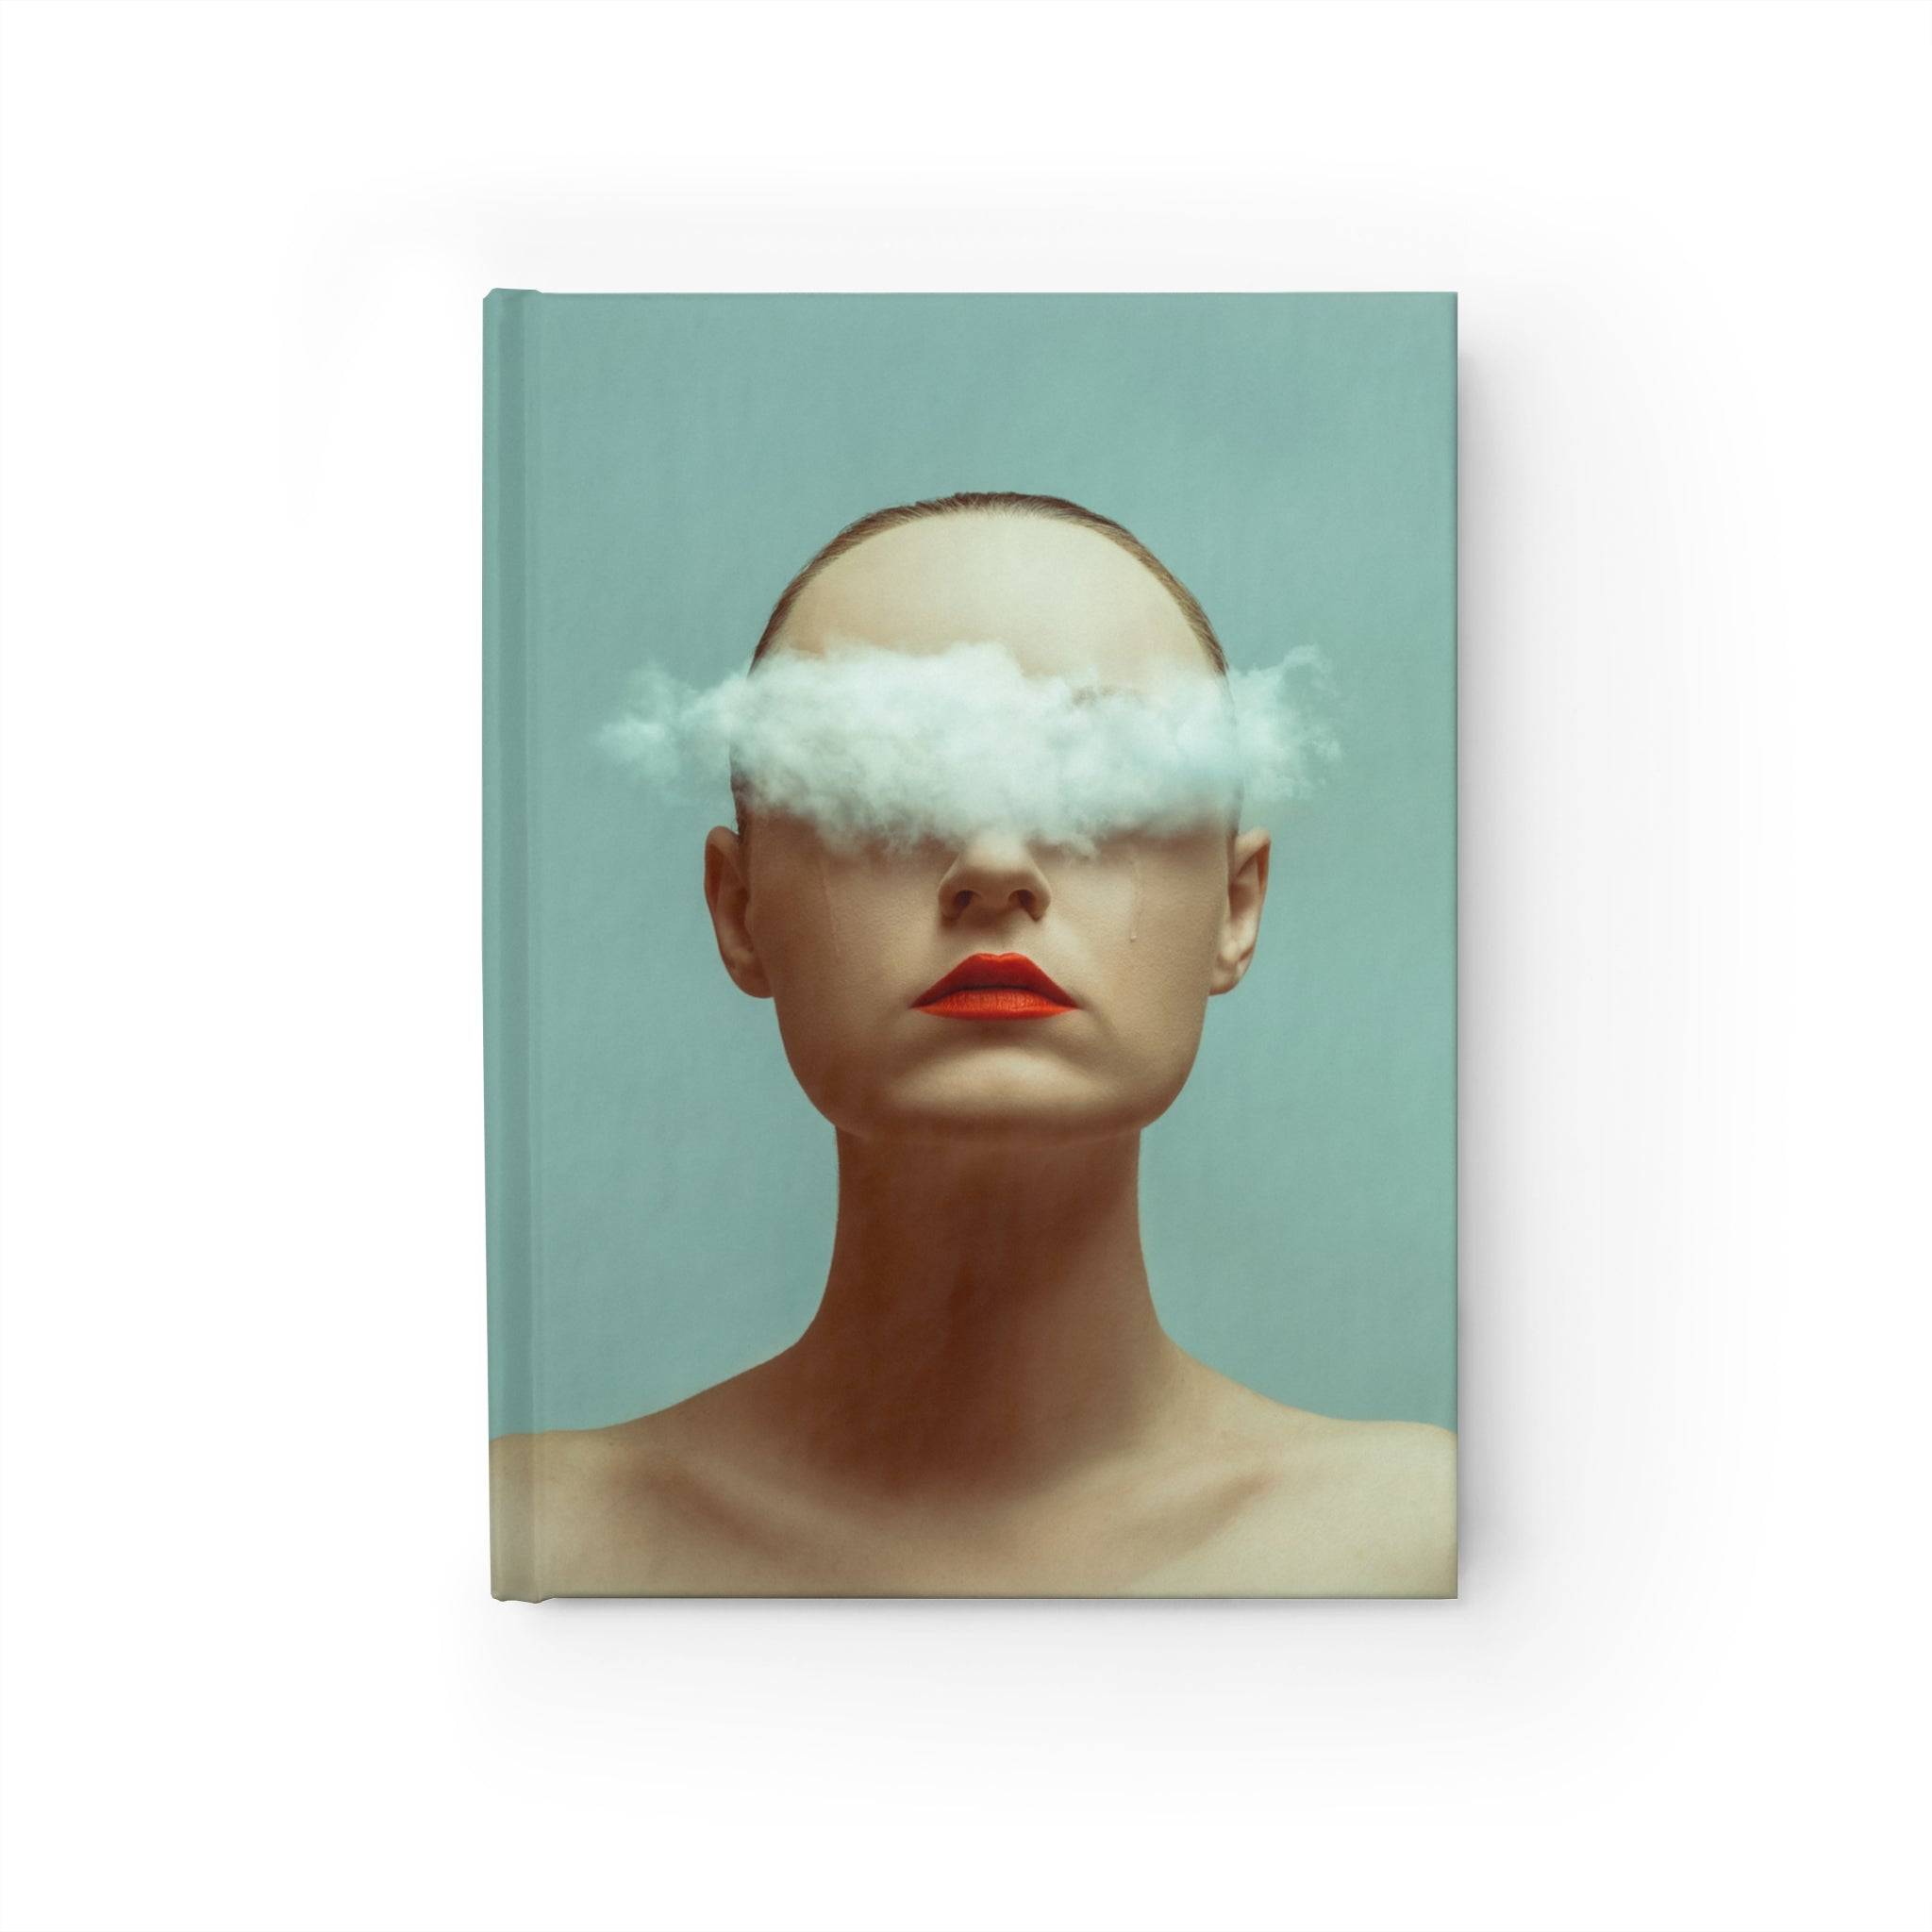 Cloud on woman's face notebook